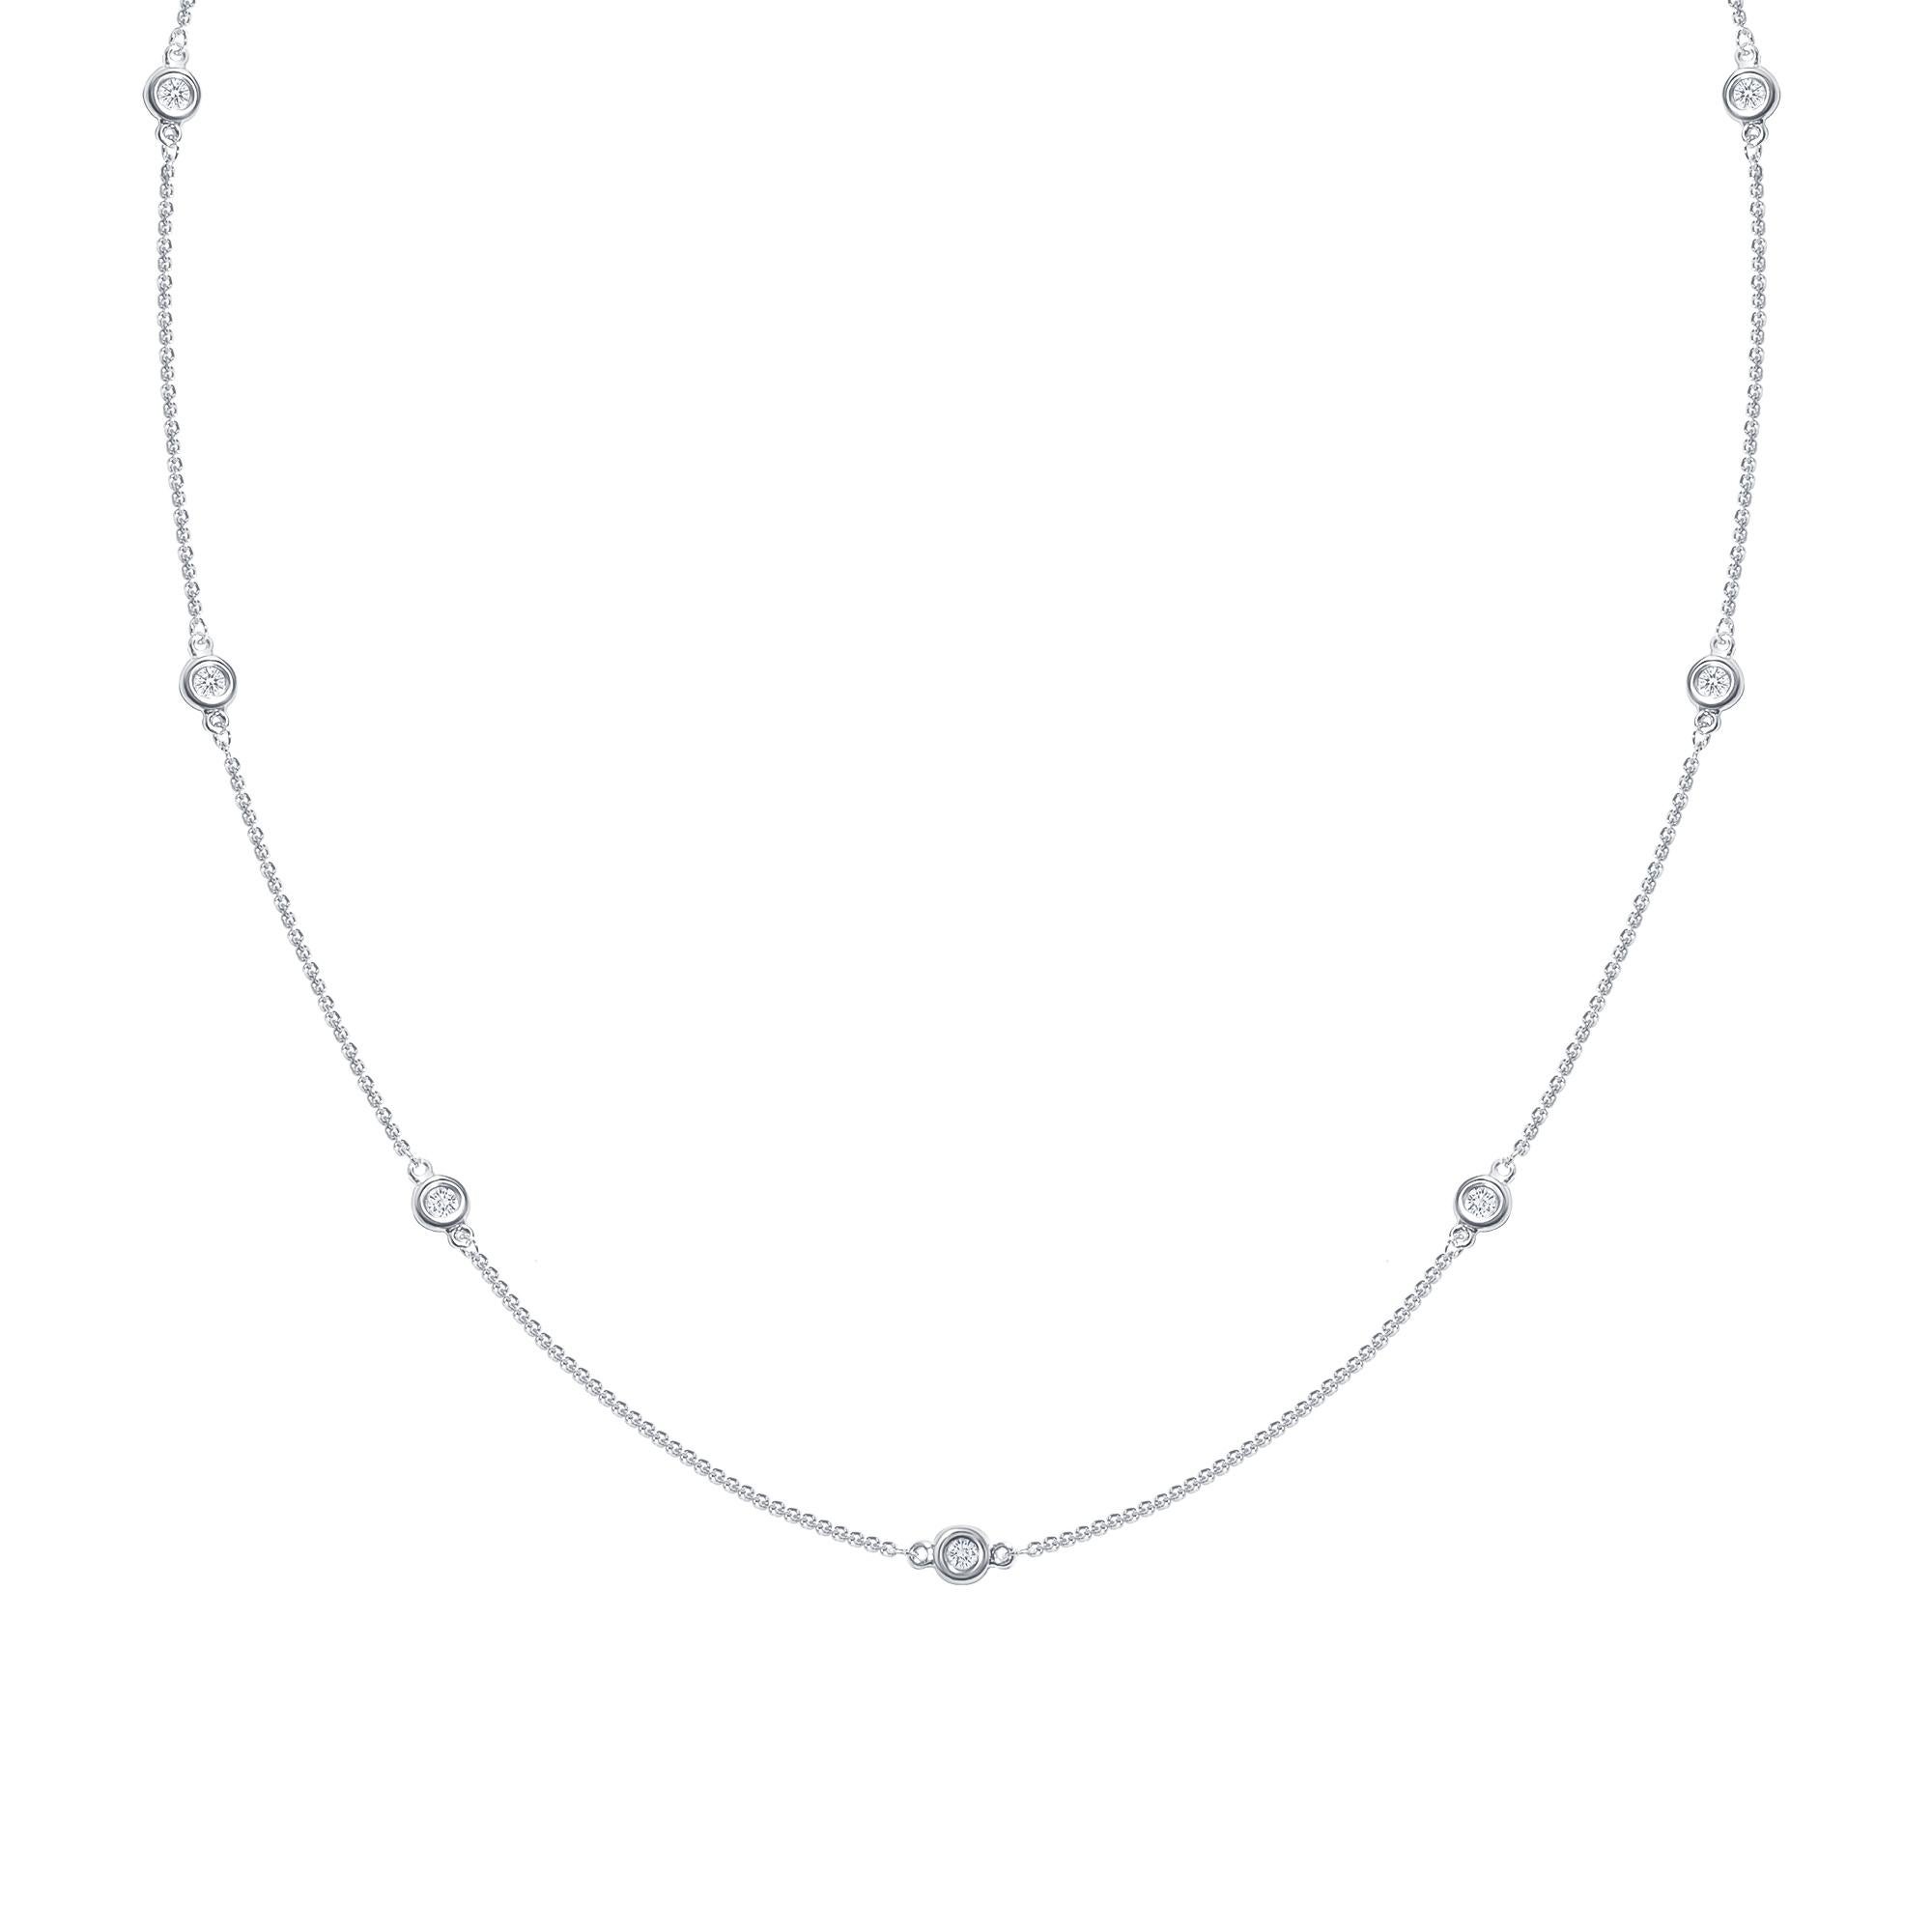 Eight elegant round diamonds set in a bezel setting along a 14k gold chain necklace.

Gold: 14K Gold
Number of Diamonds: Eight
Gold Color: White Gold
Carat: 2 Carat
Necklace Length: 20 Inches
Diamond Clarity: VS
Diamond Color: F
Chain Type: